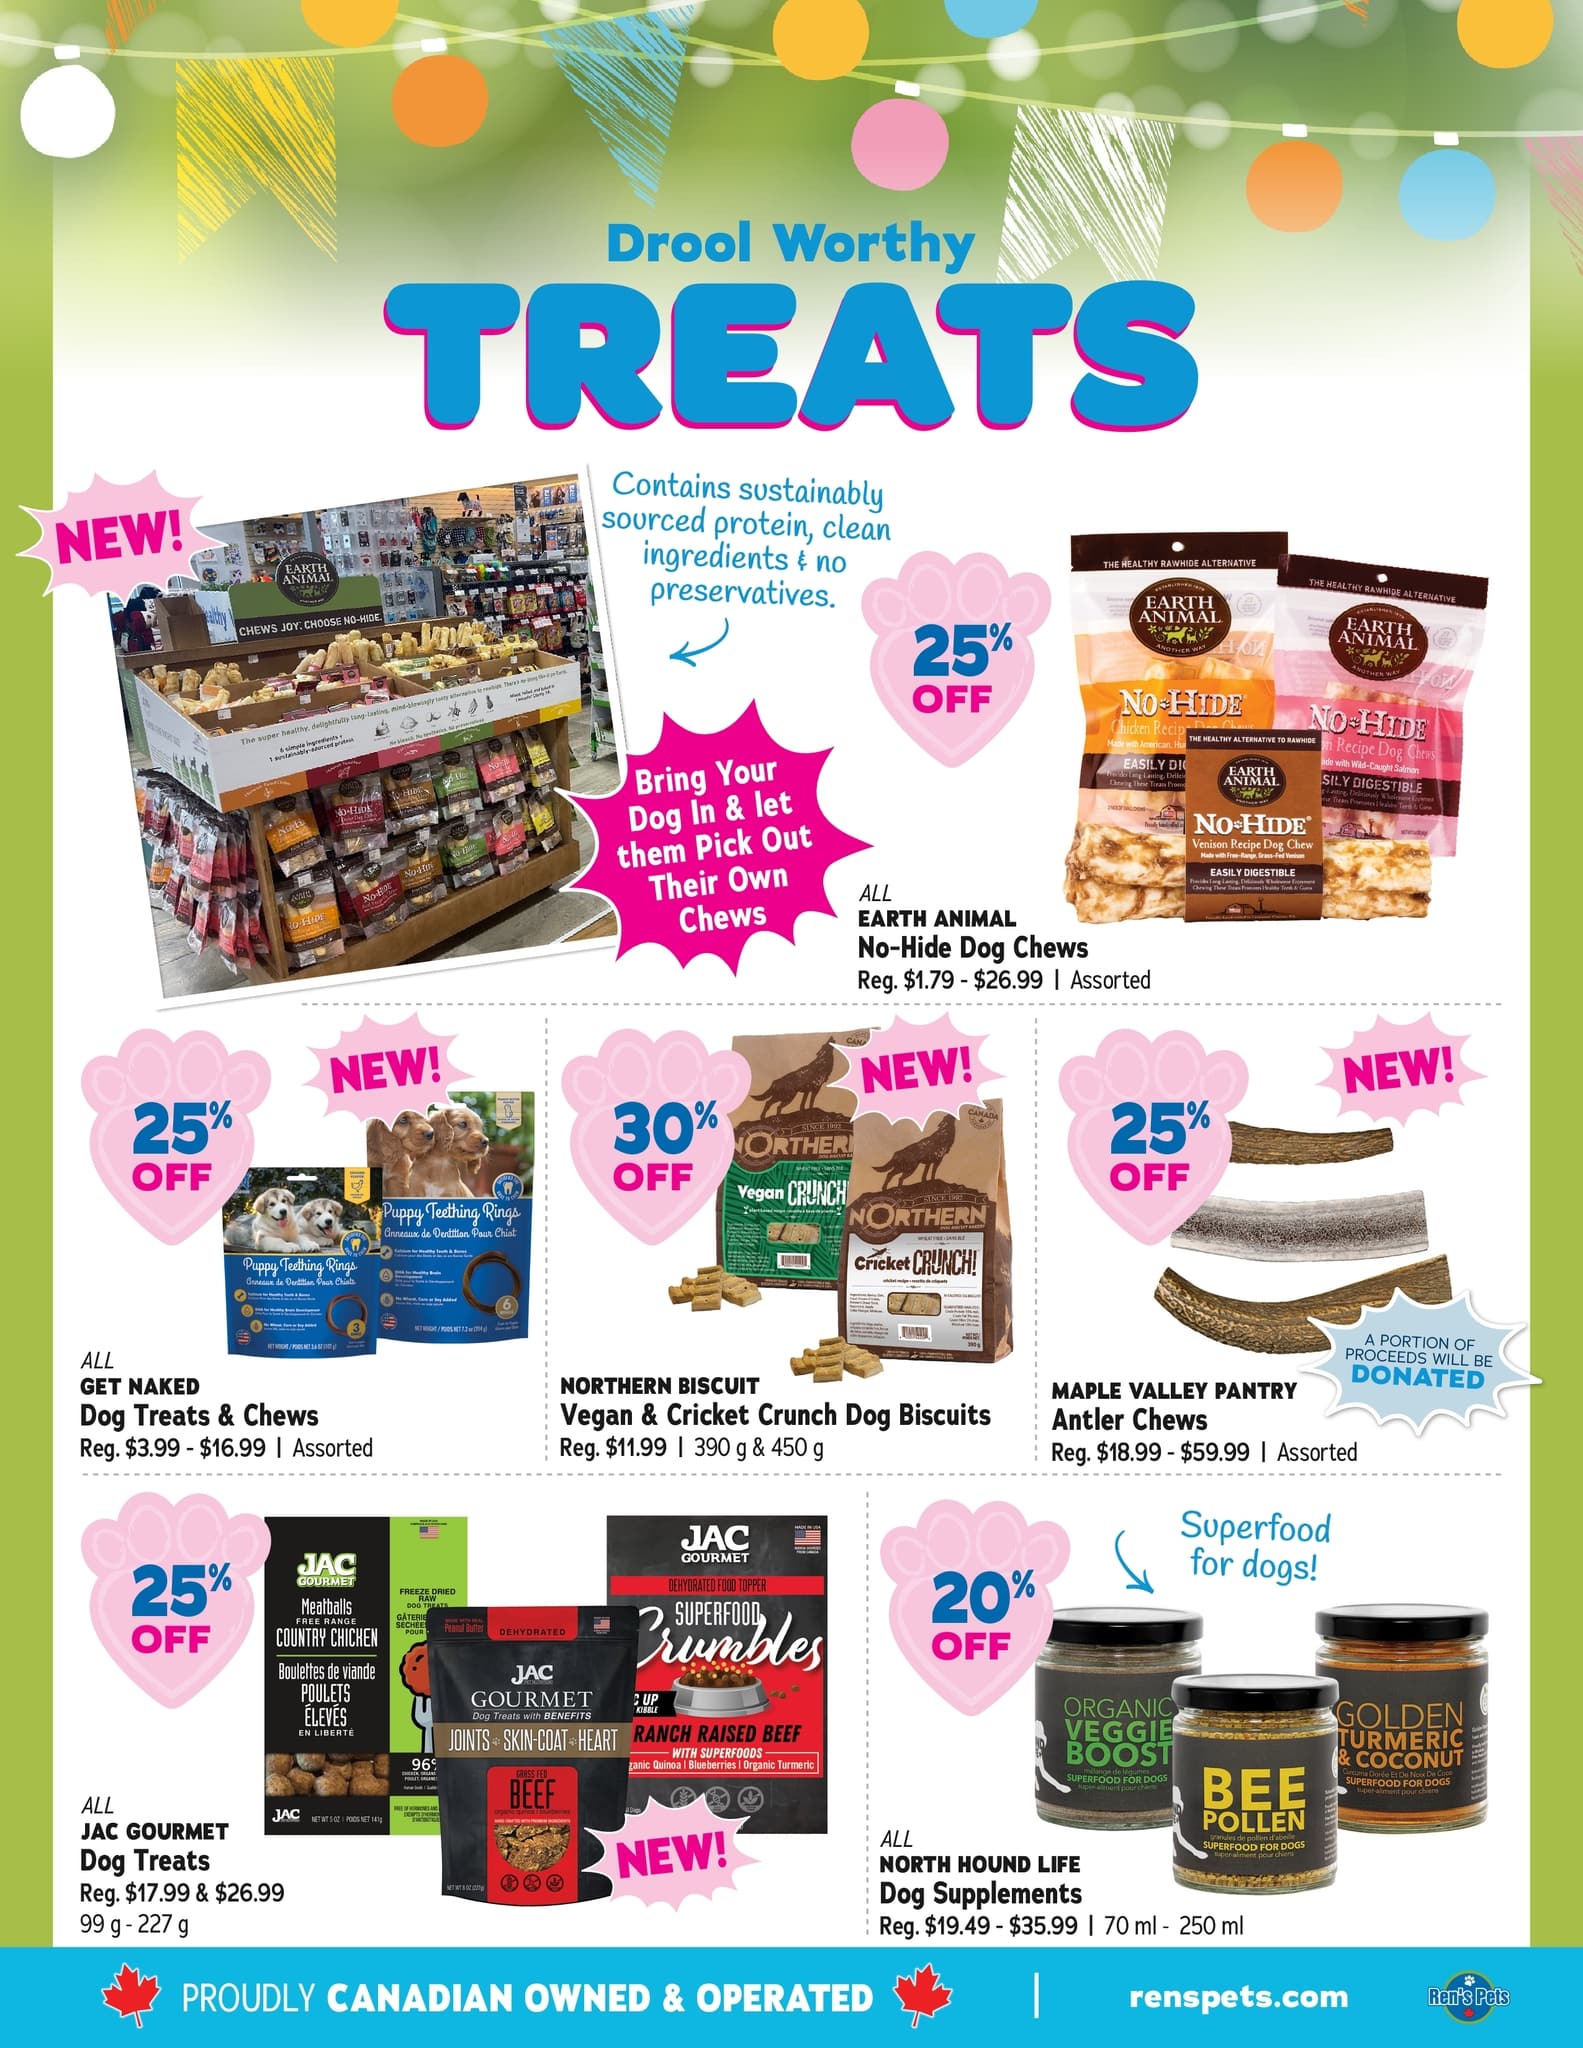 Ren’s Pets Depot - Monthly Savings - Page 11